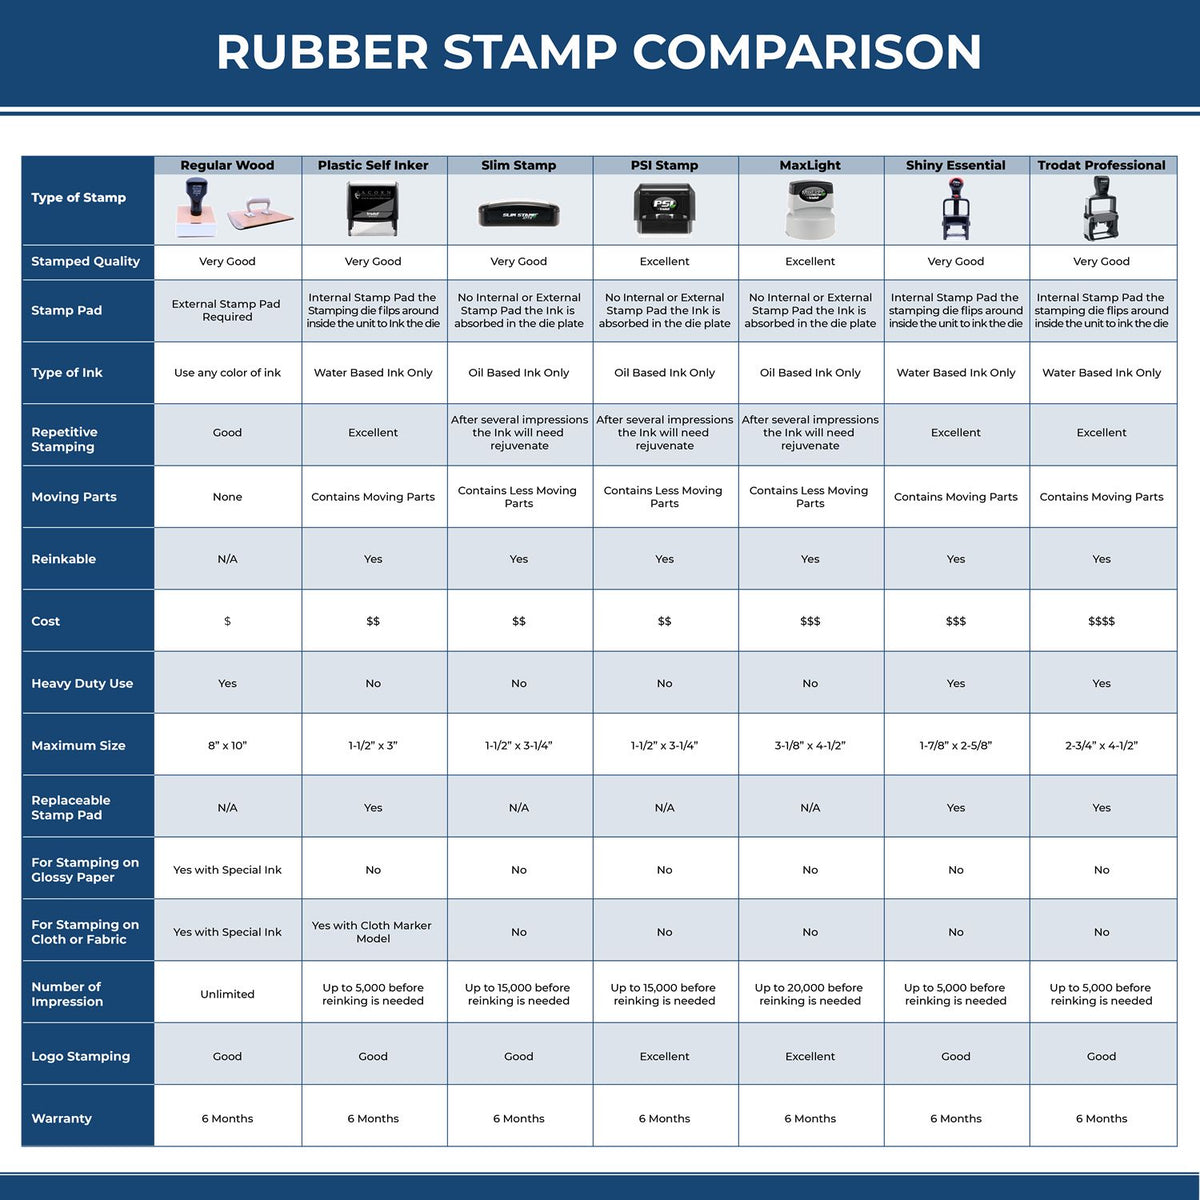 A comparison chart for the different types of mount models available for the PSI Wyoming Notary Stamp.